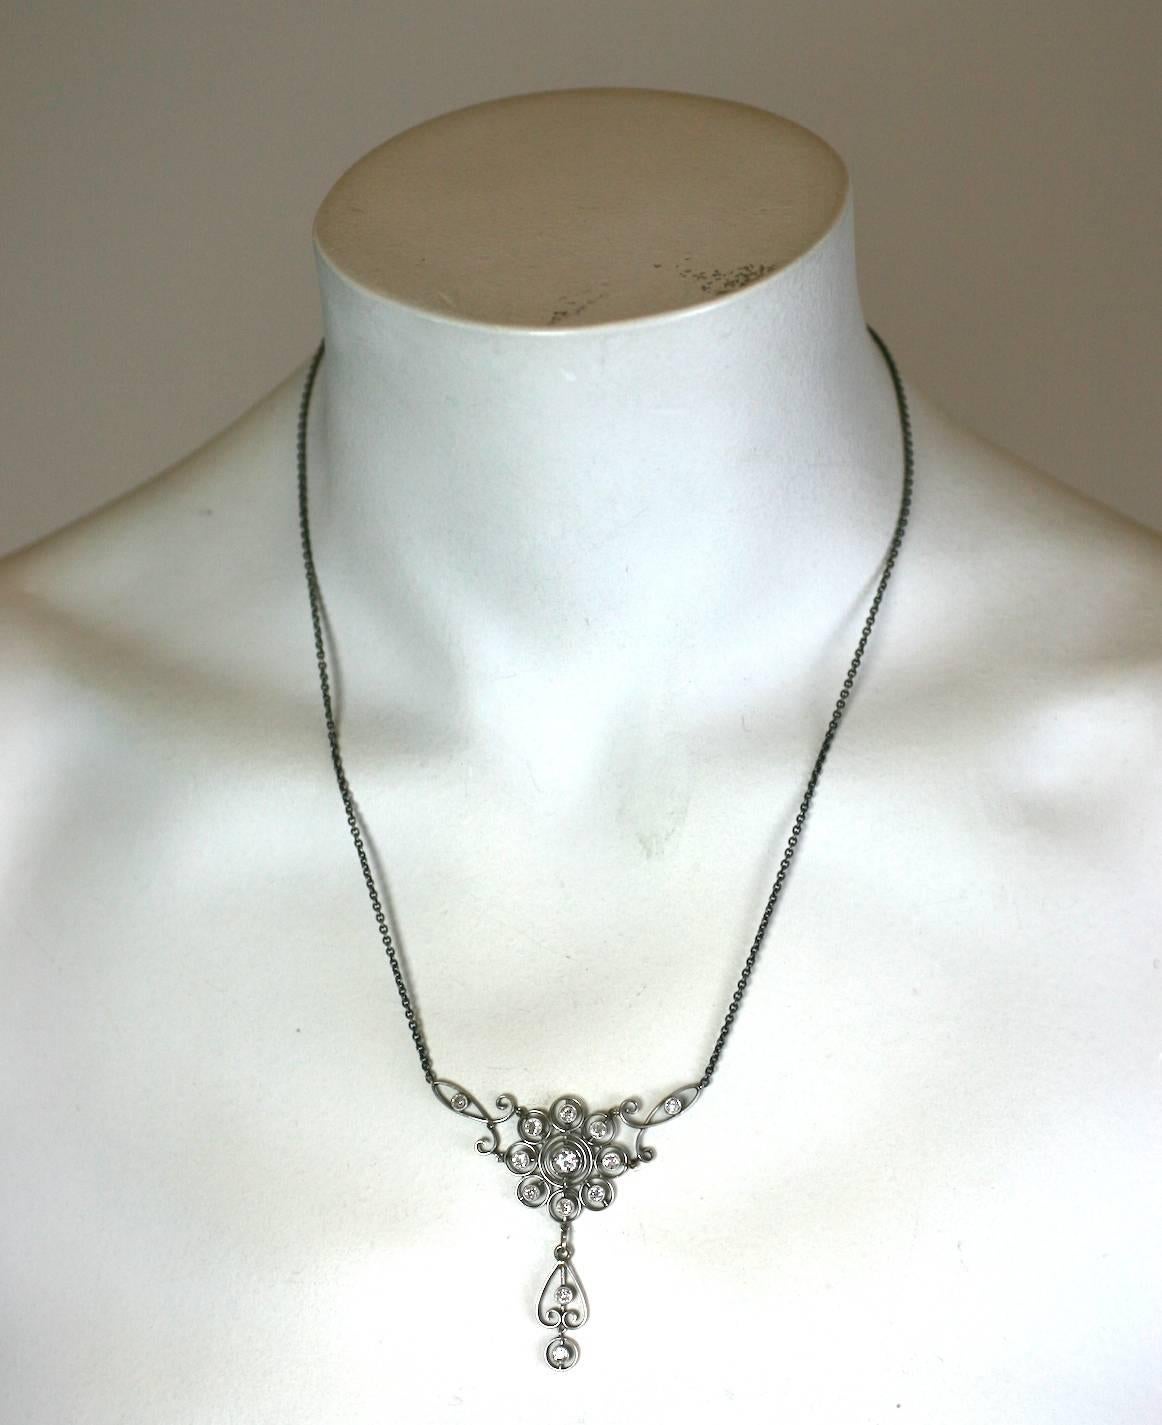 Edwardian Diamond Pendant Necklace In Excellent Condition For Sale In New York, NY